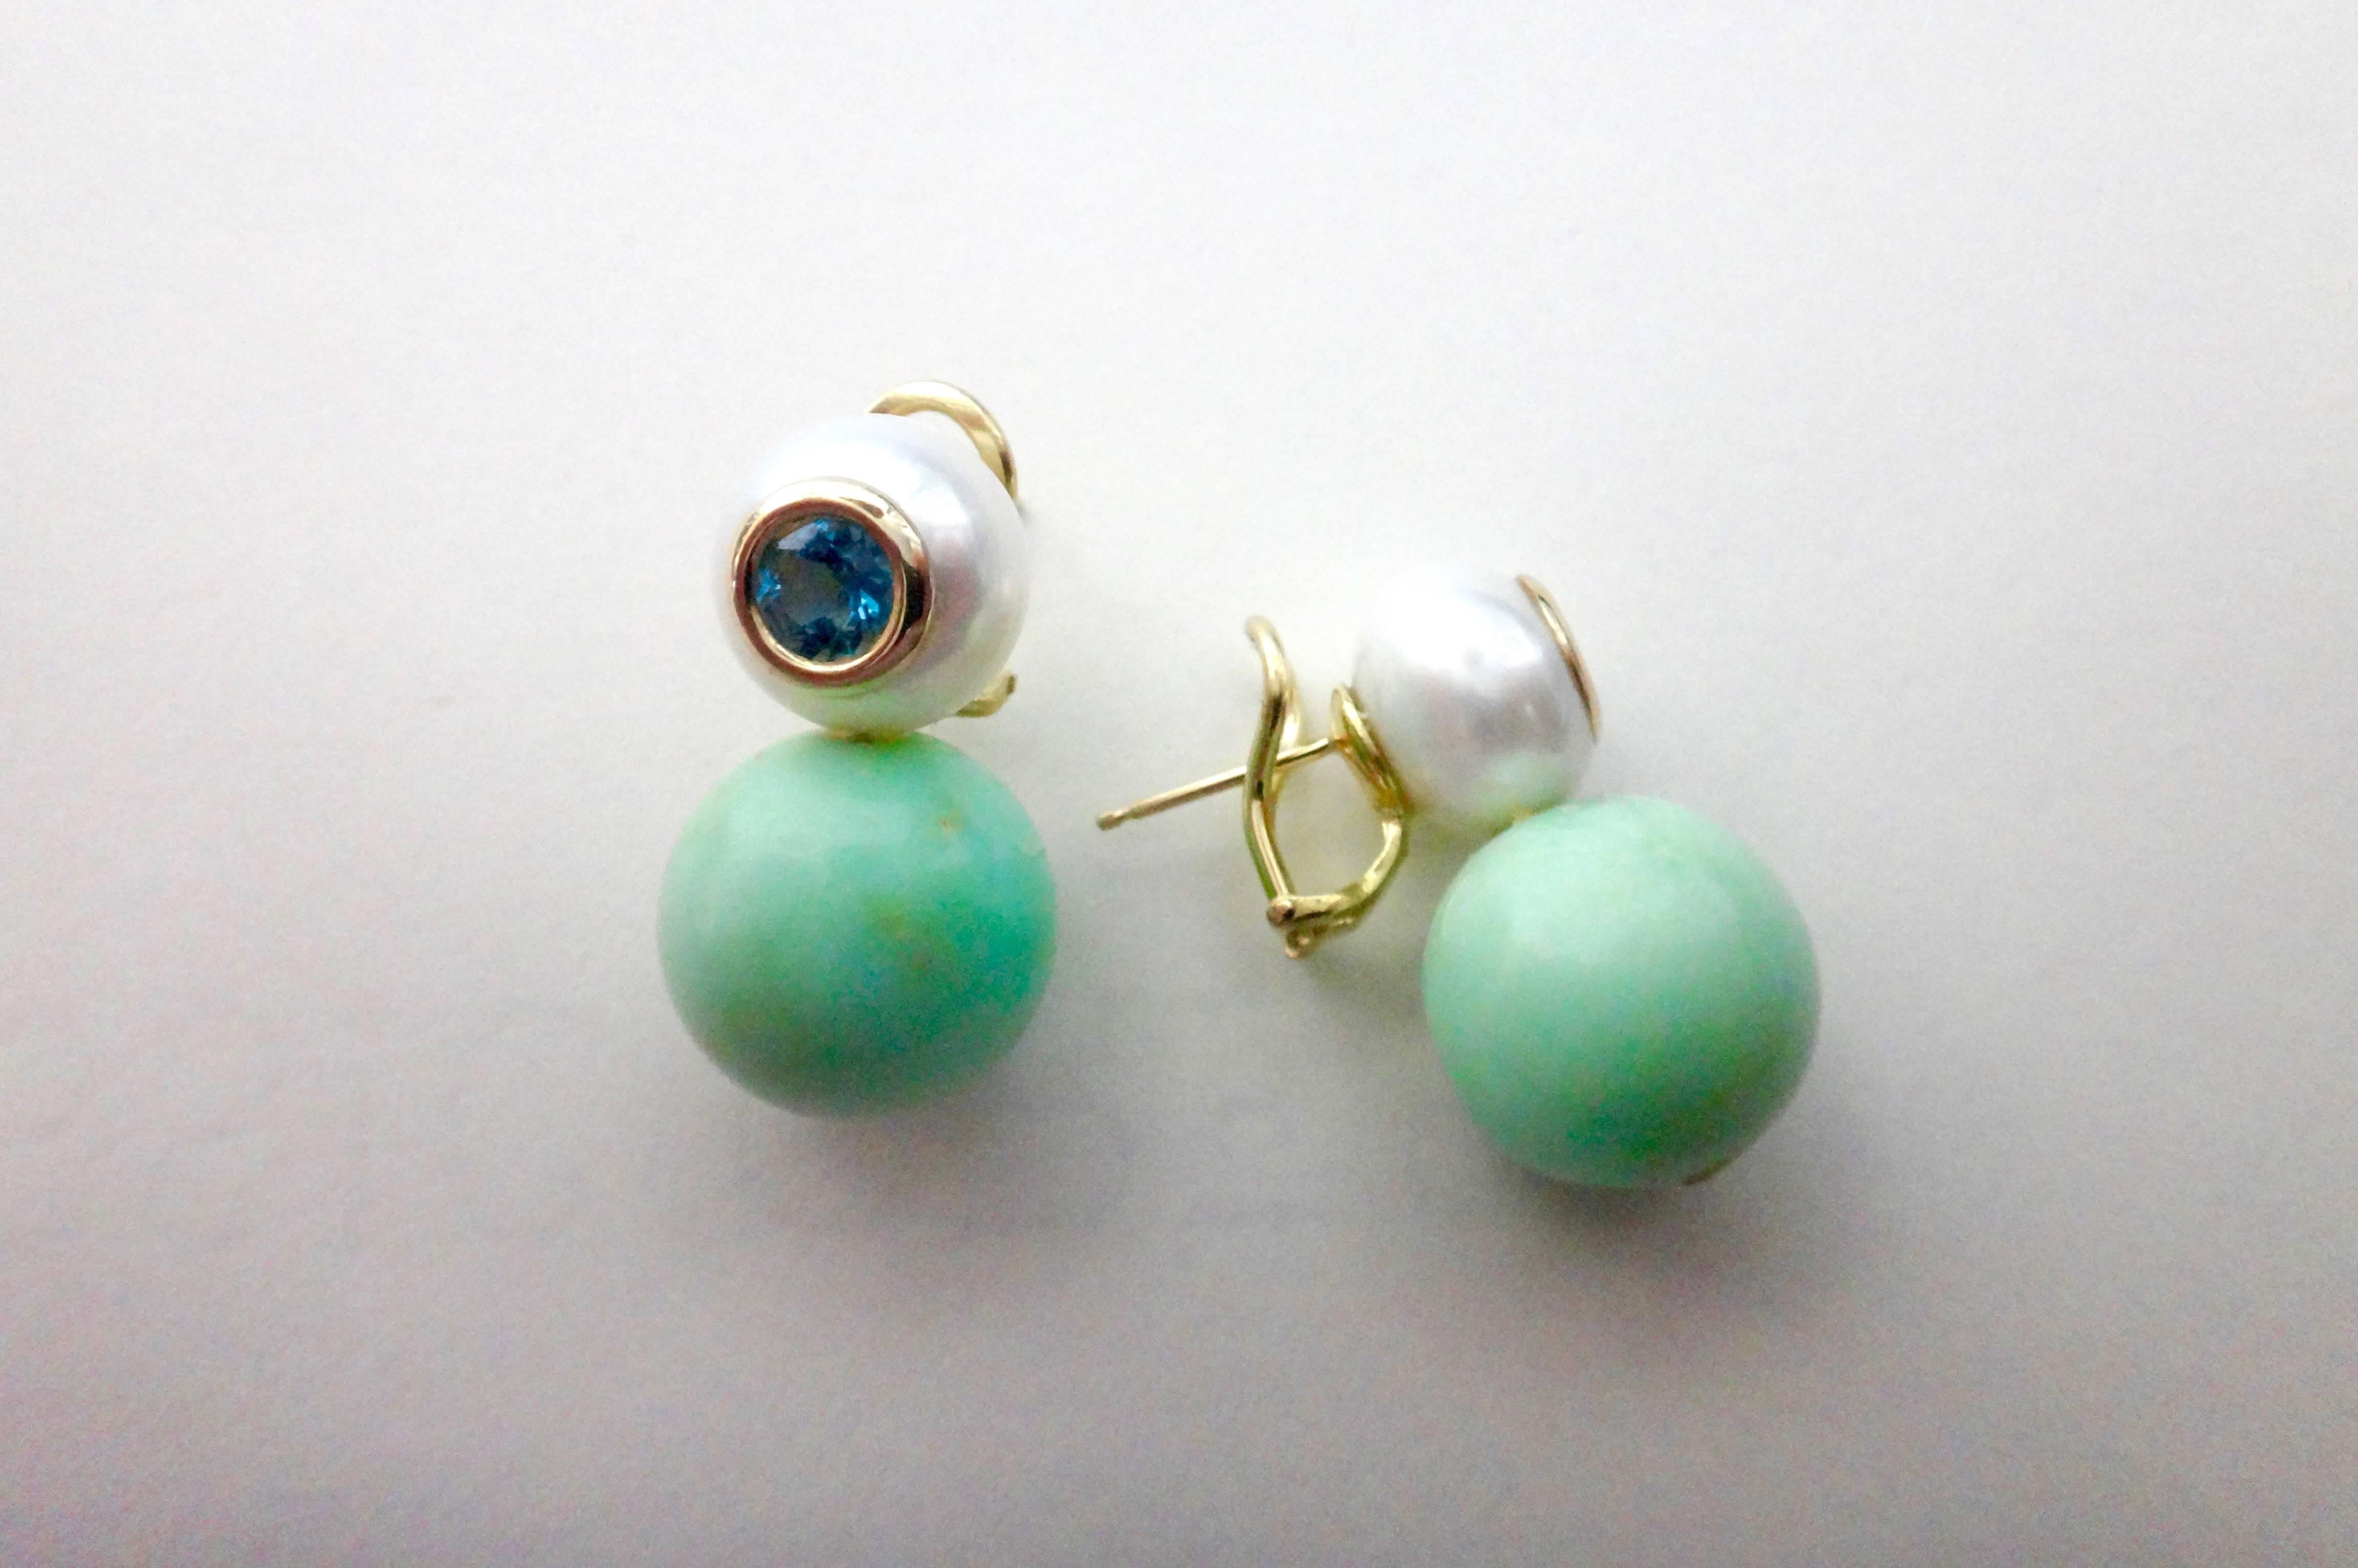 Chrysoprase spheres measuring 16mm are complimented with 13mm button shaped South Seas pearls decorated with bezel set blue zircons.  Chrysoprase is a gemstone variety of chalcedony (a cryptocrystalline form of silica) that contains small quantities